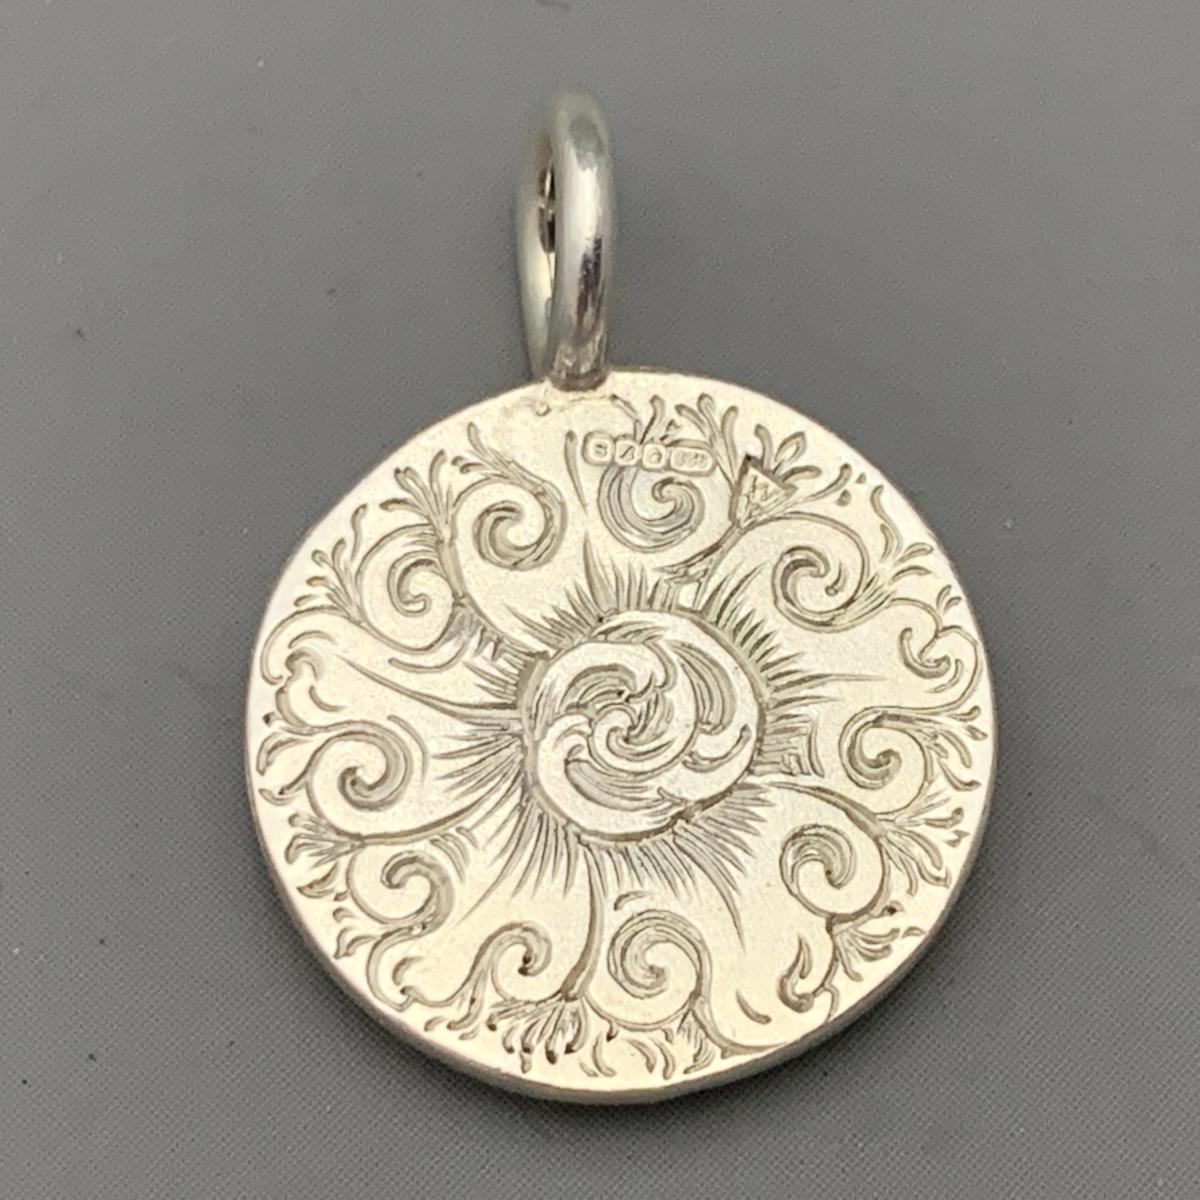 MALCOLM APPLEBY Silver BEE PENDANT - STYLES SILVER of HUNGERFORD